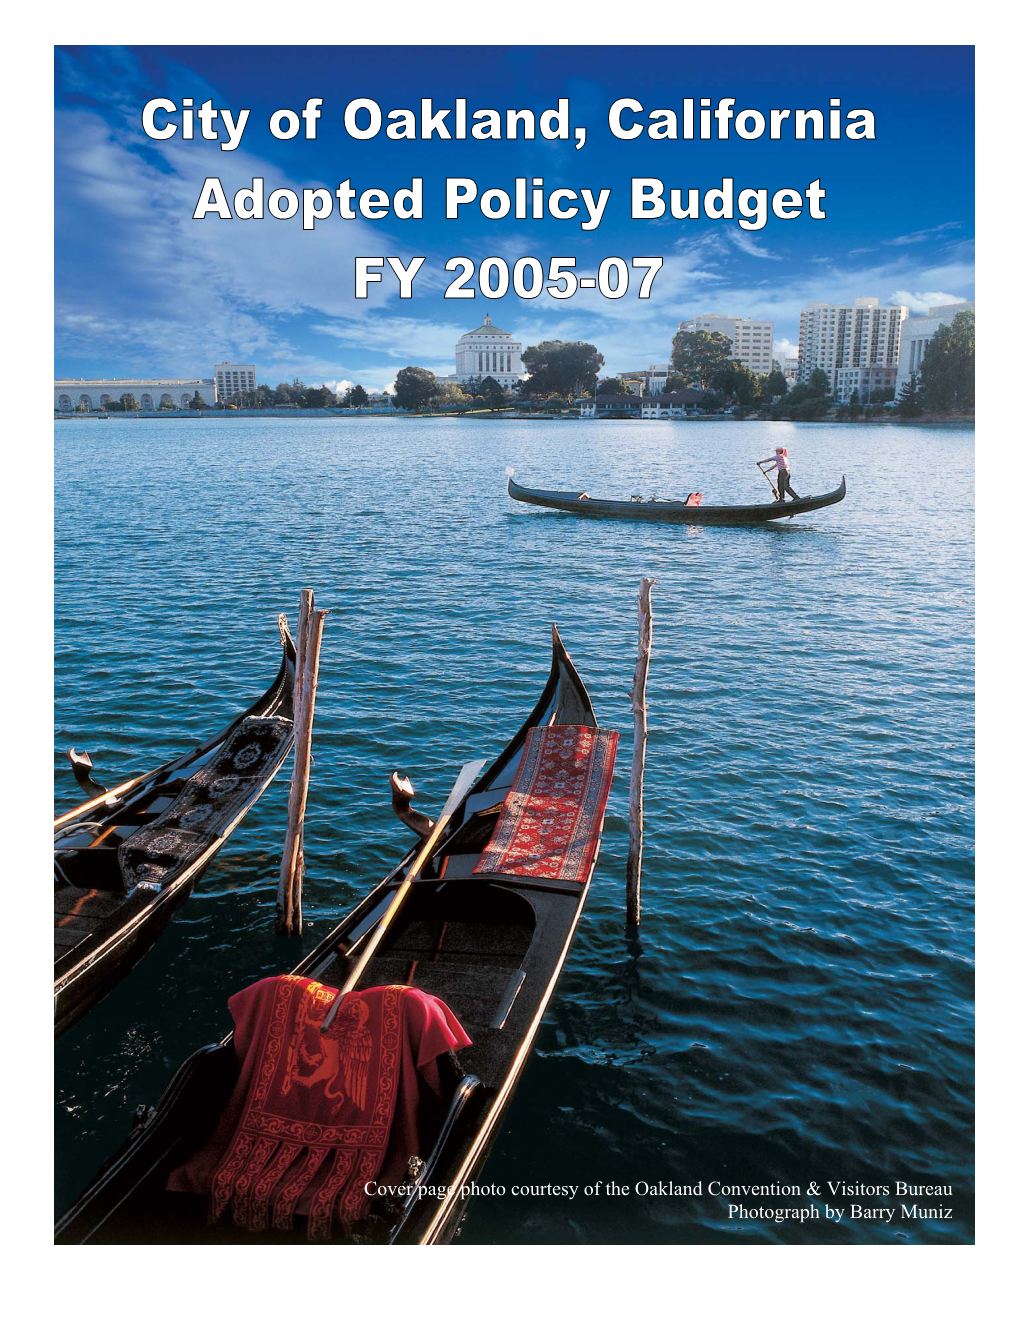 City of Oakland FY 2005-07 Adopted Policy Budget Mayor